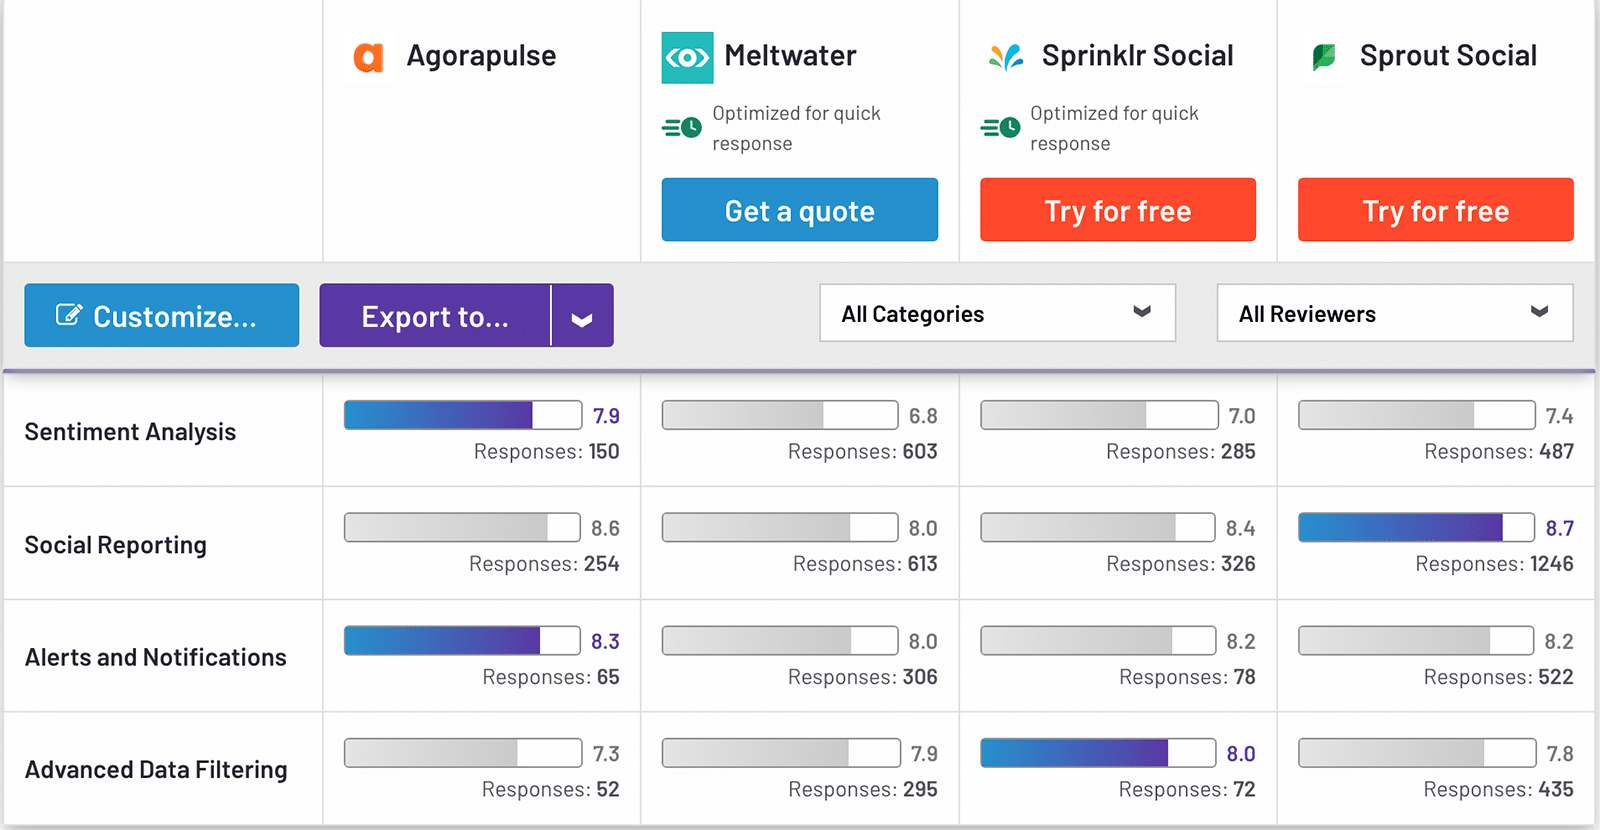 G2 comparison of sentiment analysis, social reporting, alerts and notifications, and advanced data filtering for Agorapulse, Meltwater, Sprinklr, and Sprout Social